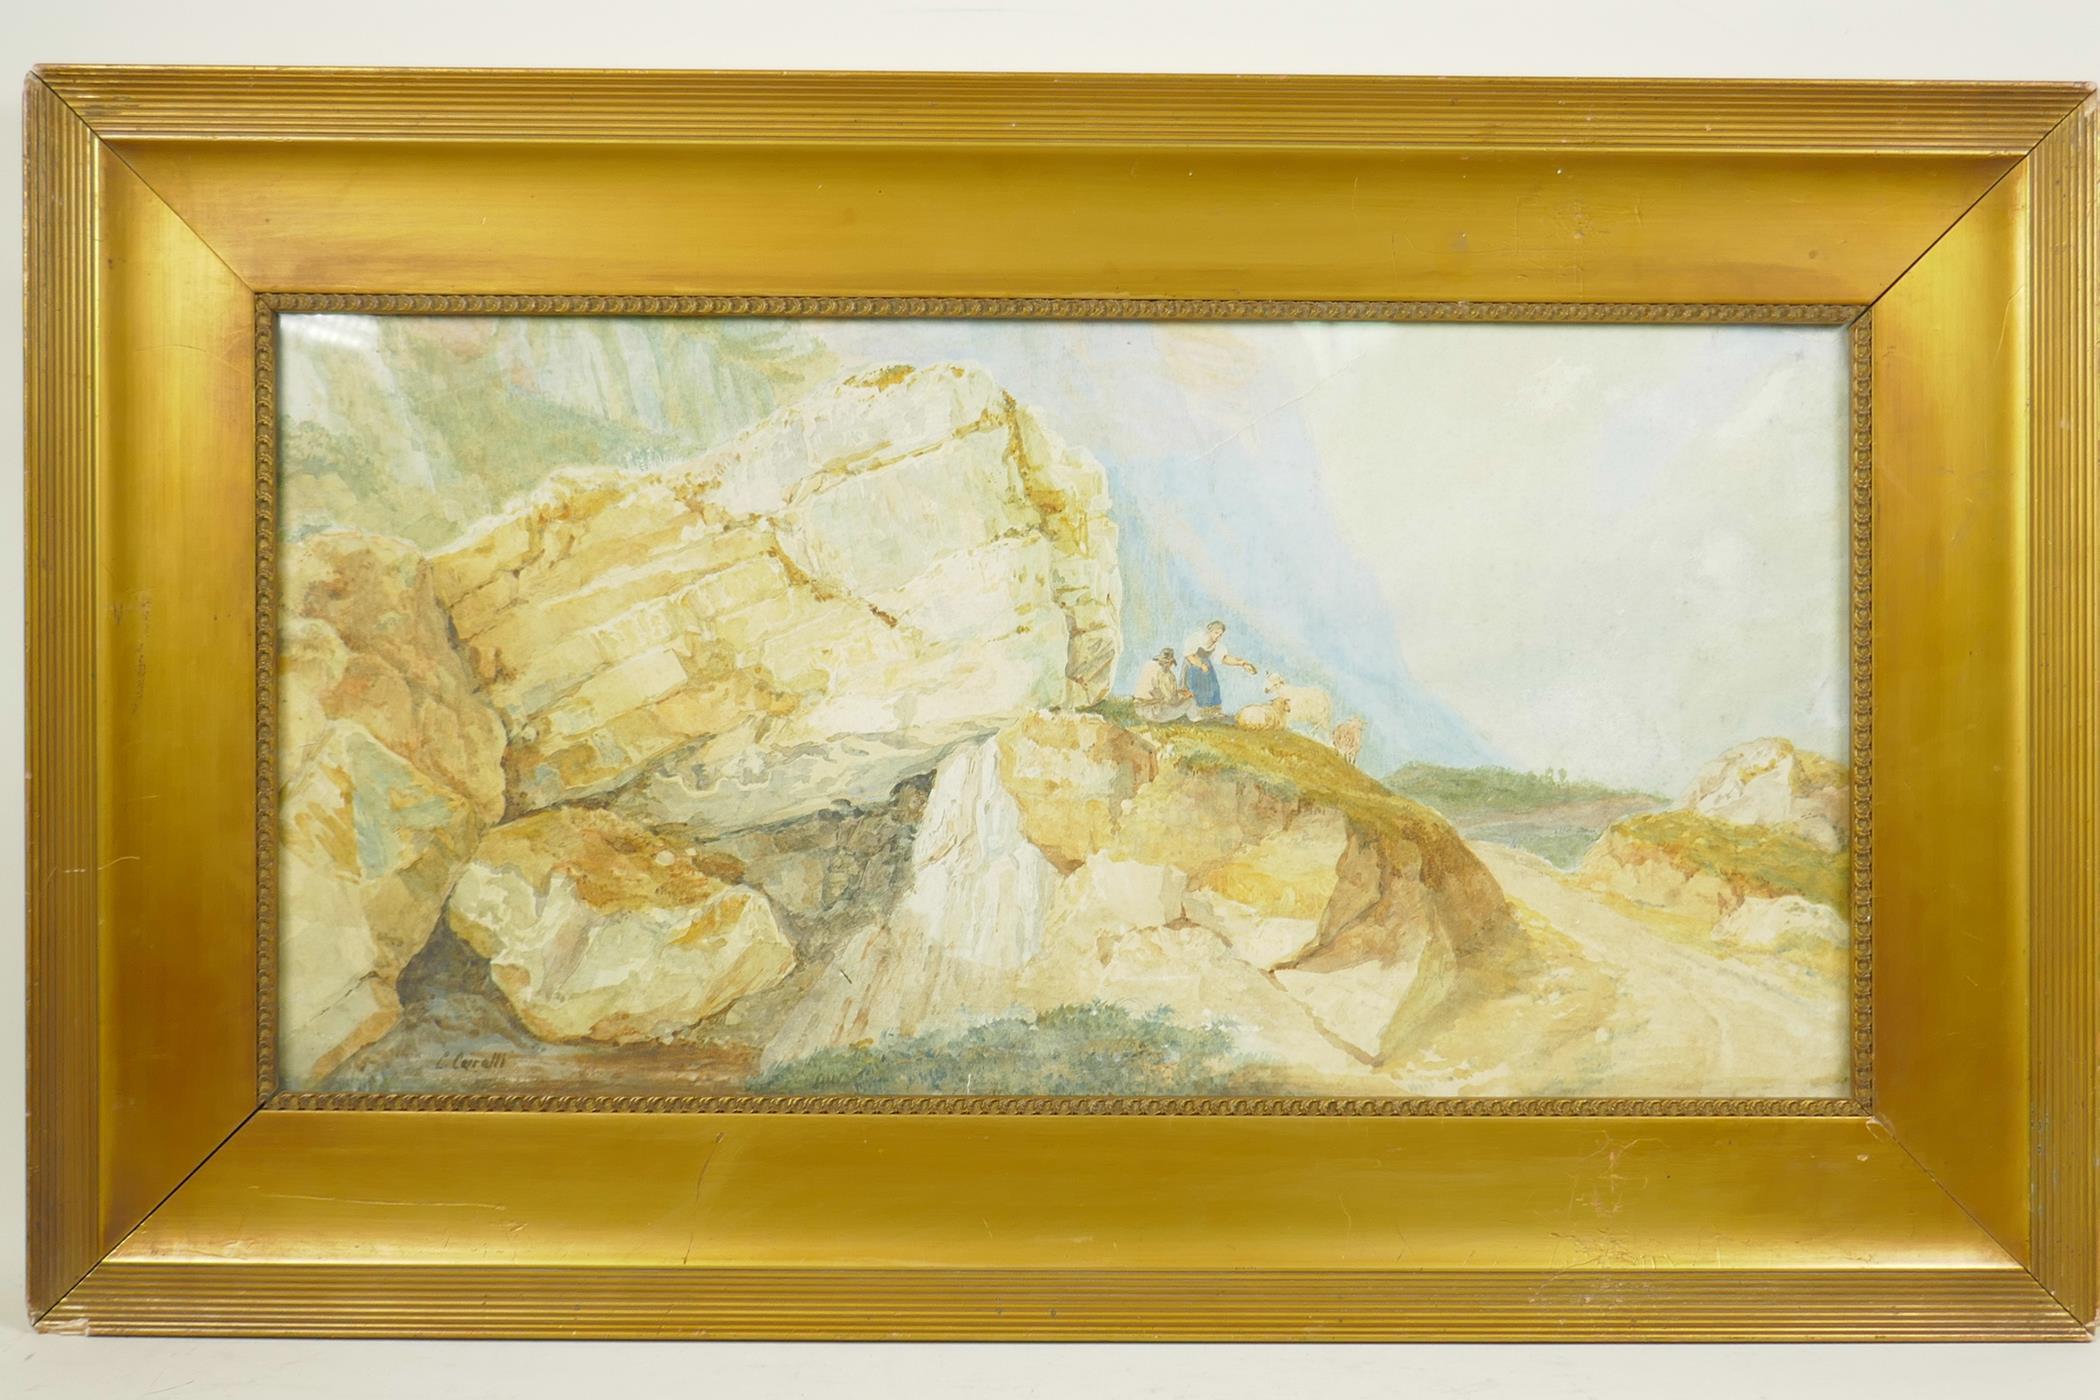 Figures with sheep by a mountain pass, signed 'C. Carelli', C19th, watercolour, 10" x 20" - Image 2 of 6